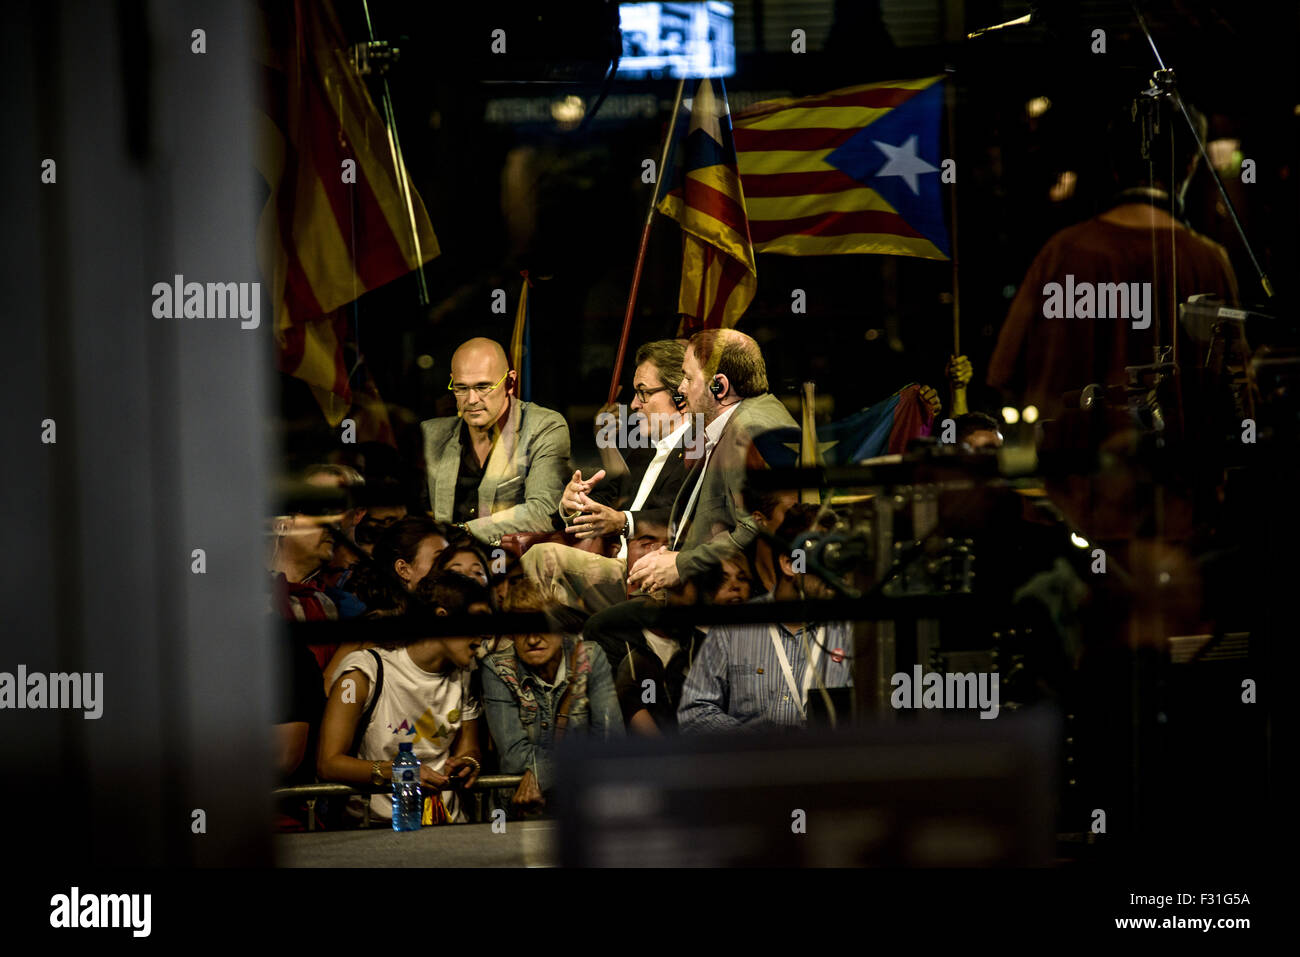 Barcelona, Catalonia, Spain. 27th Sep, 2015. RAUL ROMEVA, ARTUR MAS and ORIOL JUNQUERAS from the pro-independence cross-party electoral list 'Junts pel Si' (Together for the yes) are seen behind reflections in glass as they participate in a TV debate during the Election Night party atBarcelona's Mercat del Born. © Matthias Oesterle/ZUMA Wire/Alamy Live News Stock Photo